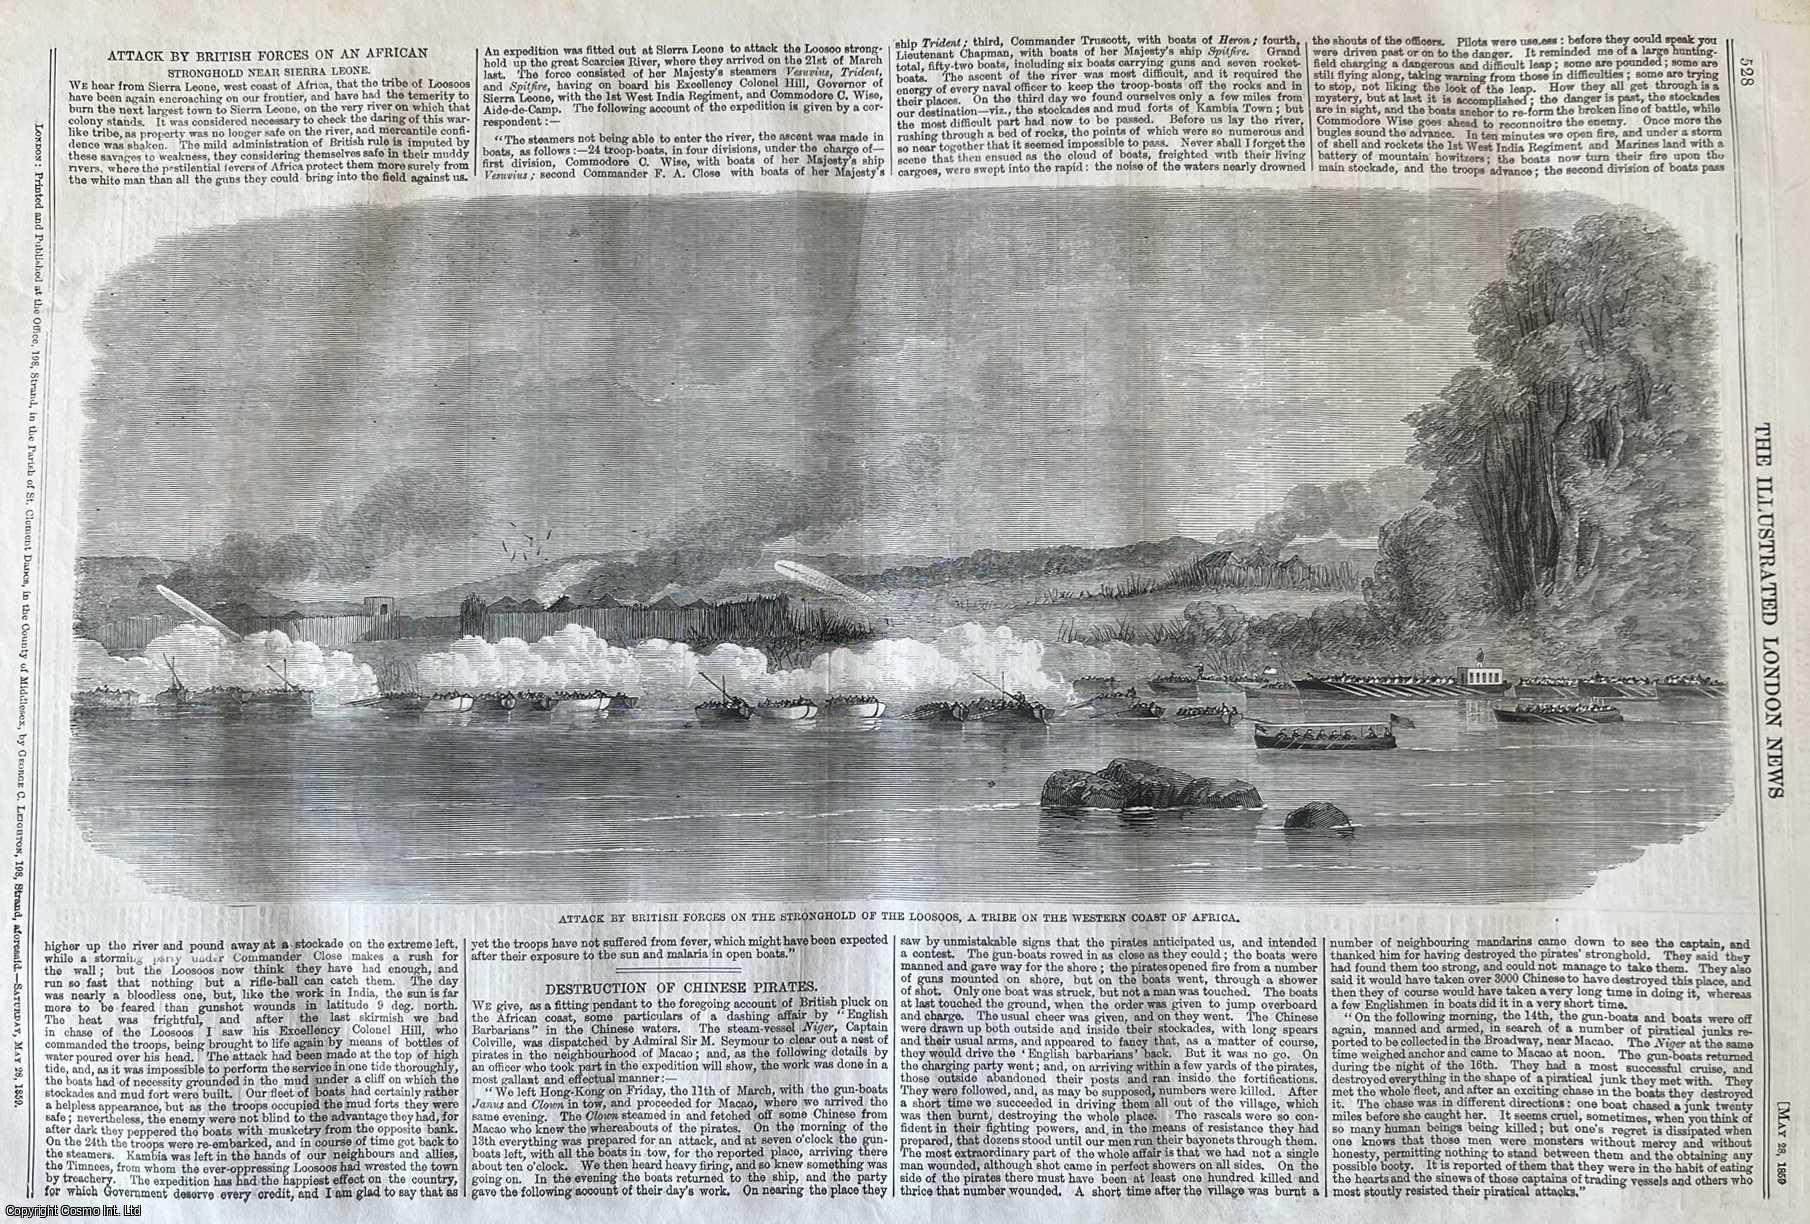 SIERRA LEONE - Attack by British Forces on the Stronghold of the Loosoos near Sierra Leone. An original print from the Illustrated London News, 1859.